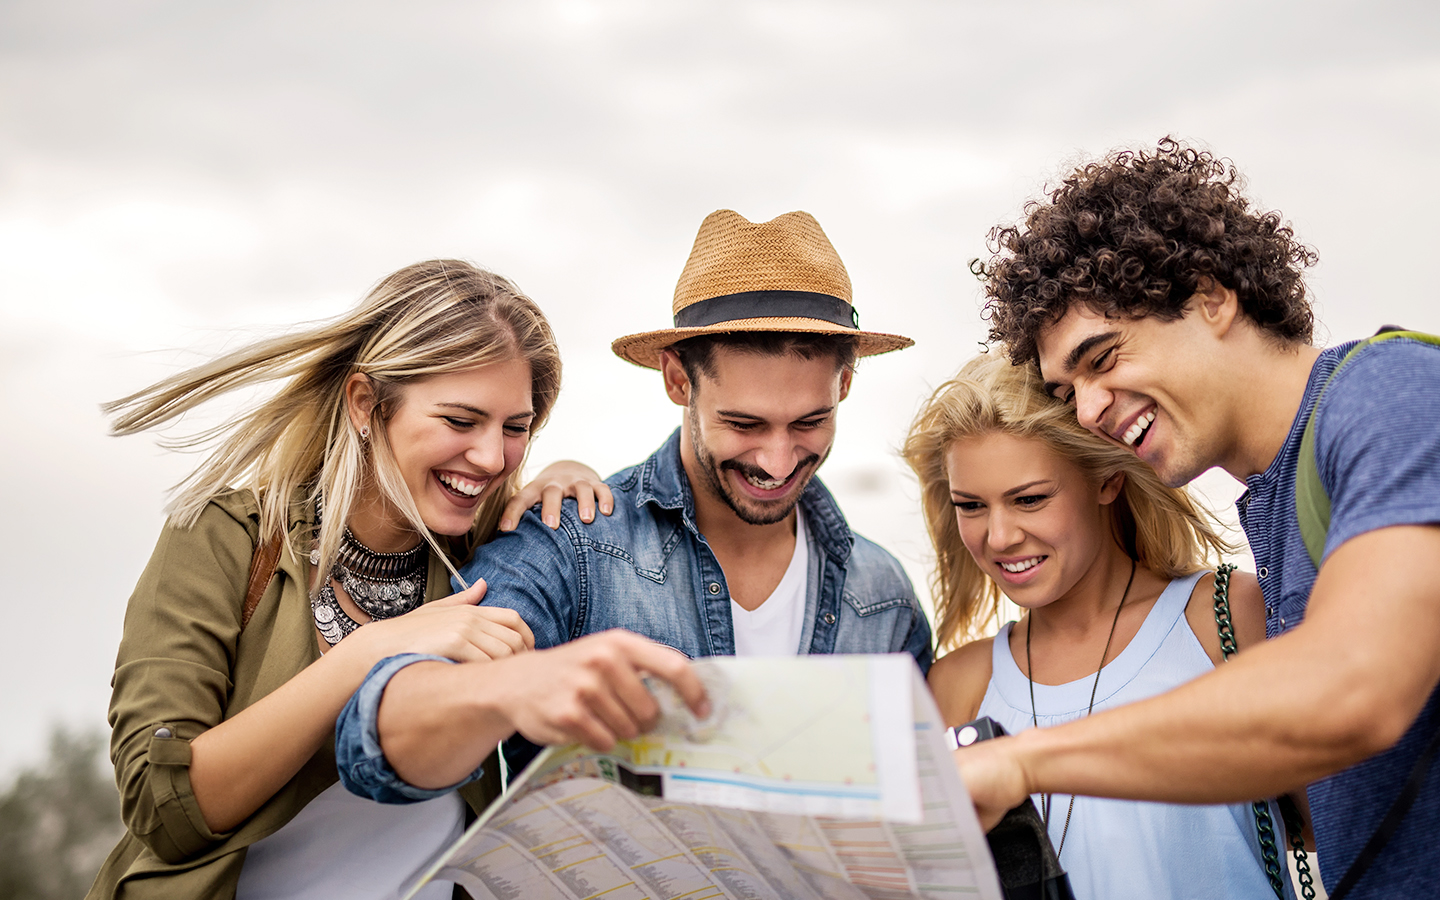 Traveling friends examine a map and smile